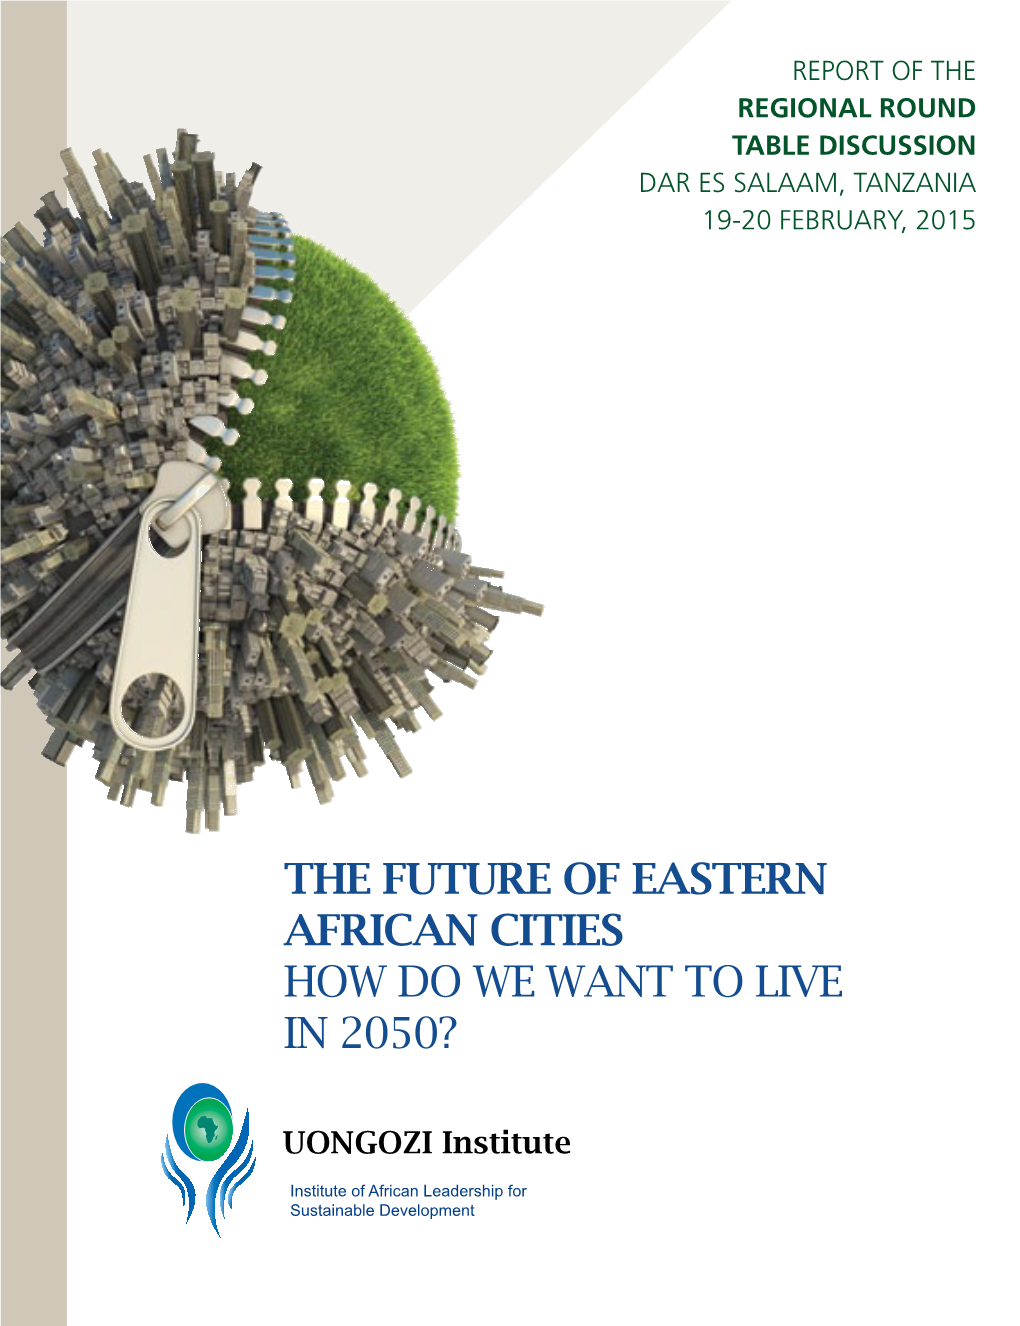 THE FUTURE of Eastern African CITIES HOW DO WE WANT to LIVE in 2050?